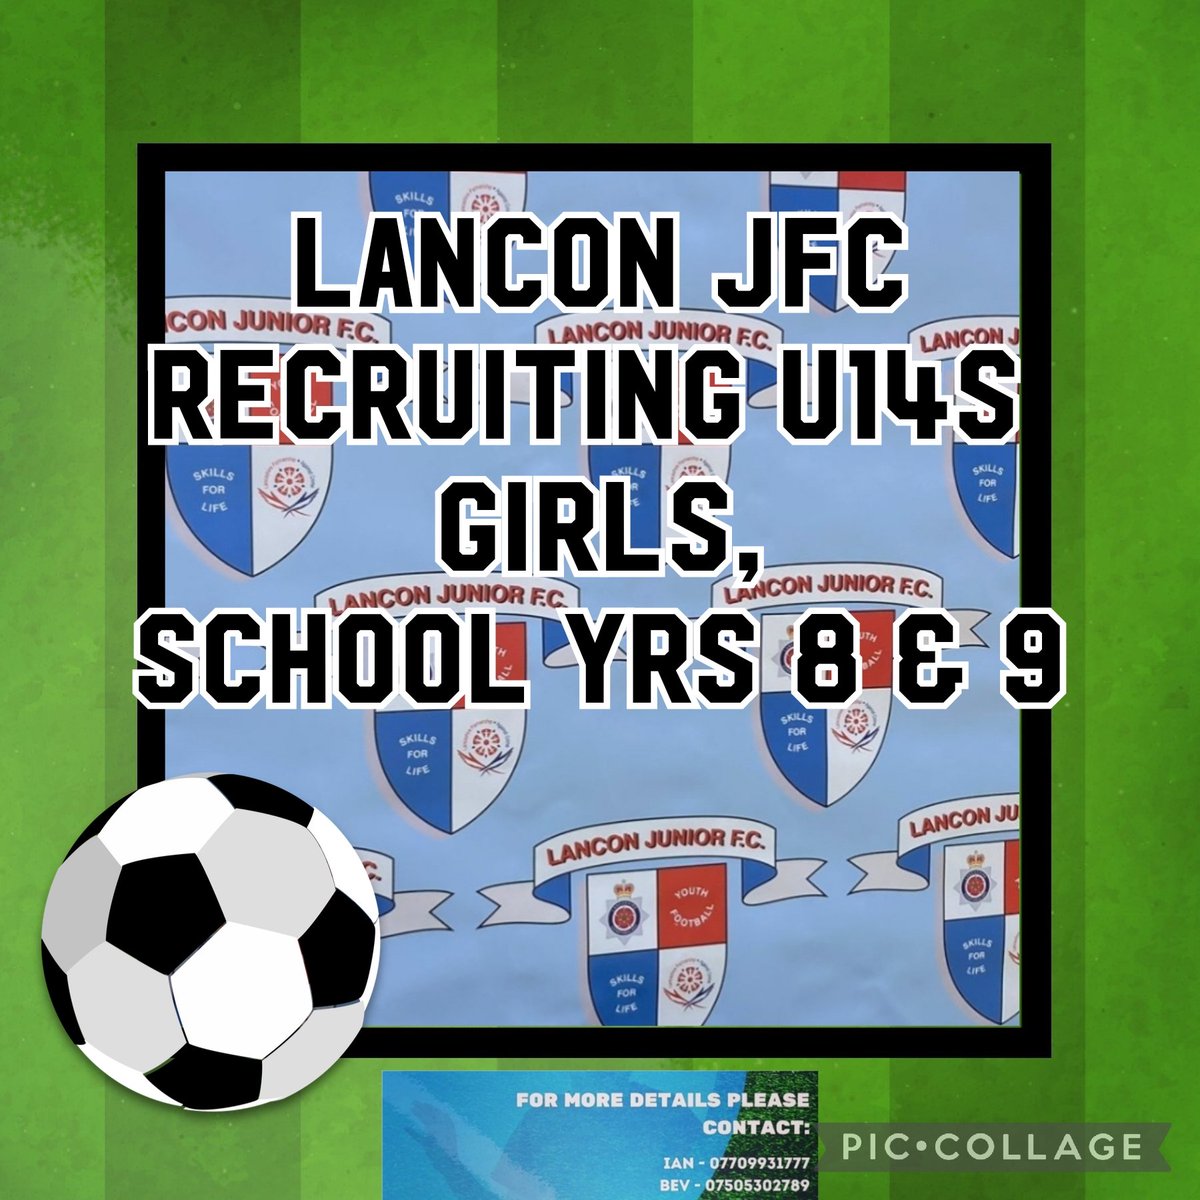 Girls u14s Recruitment!

Friendly team looking for year 8 and 9 girls.

Can offer lots of game time and player development!!

If interested see contacts below.
⚽️⚽️⚽️
@JfcLancon
@charleyy_96 
@PdplGirls
@Teamgrassroots_ 
#lanconforlife